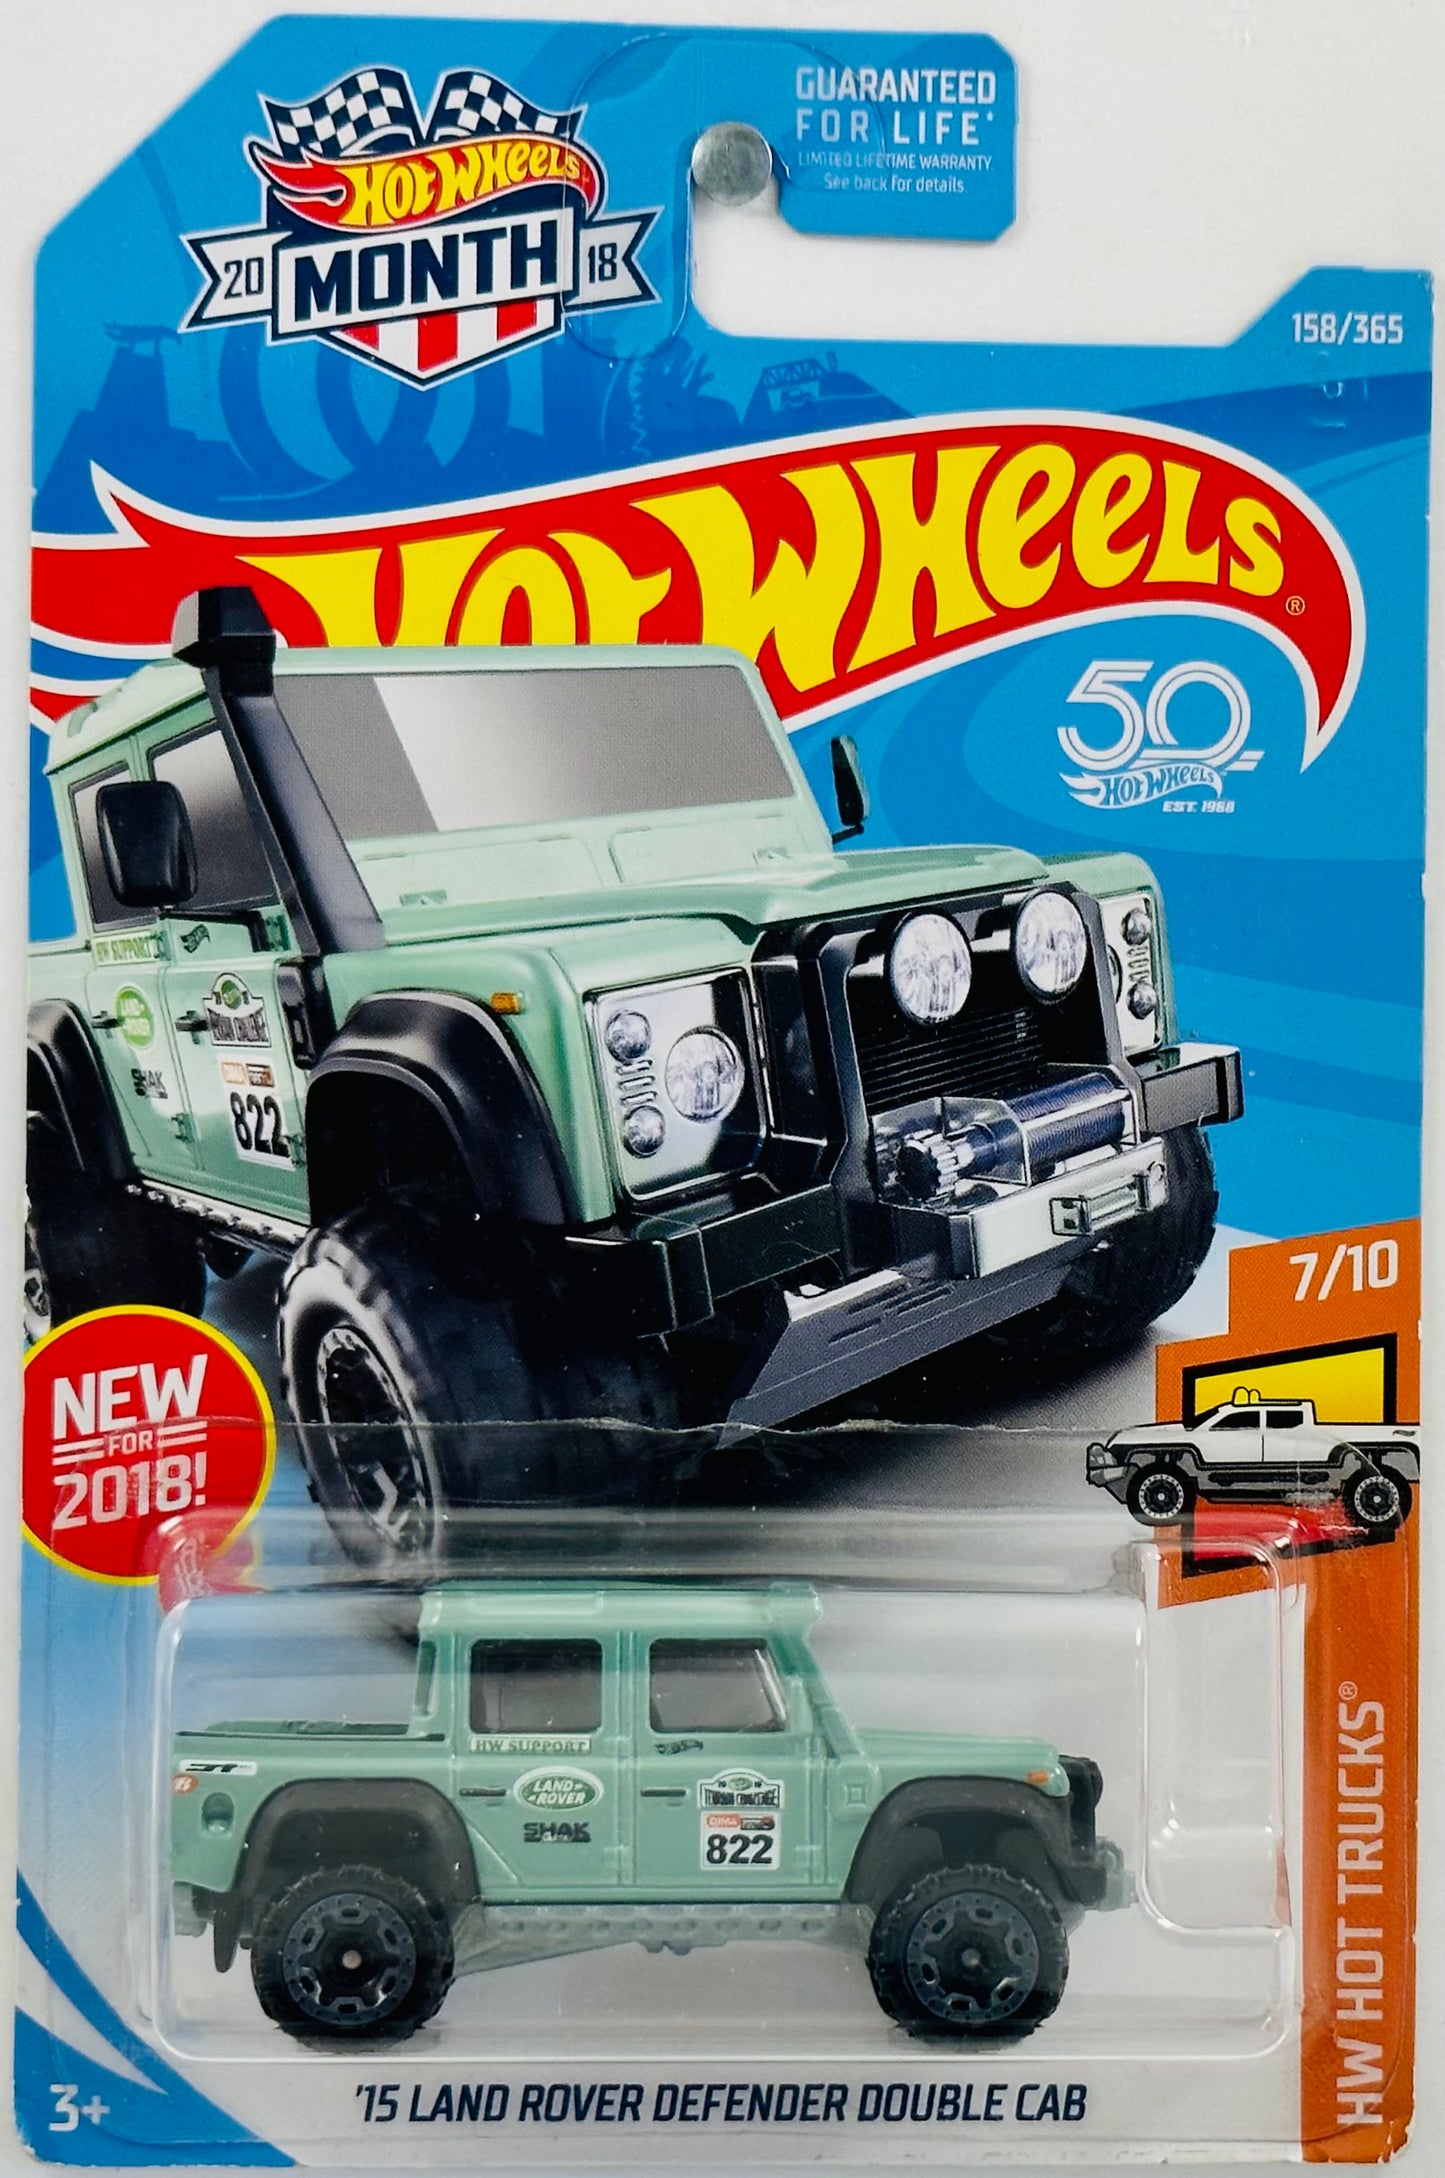 Hot Wheels 2018 - Collector # 158/365 - HW Hot Trucks 07/10 - New Models - '15 Land Rover Defender Double Cab - Eggshell Green - '822' - Walmart Exclusive - 50th Anniversary / Month / USA